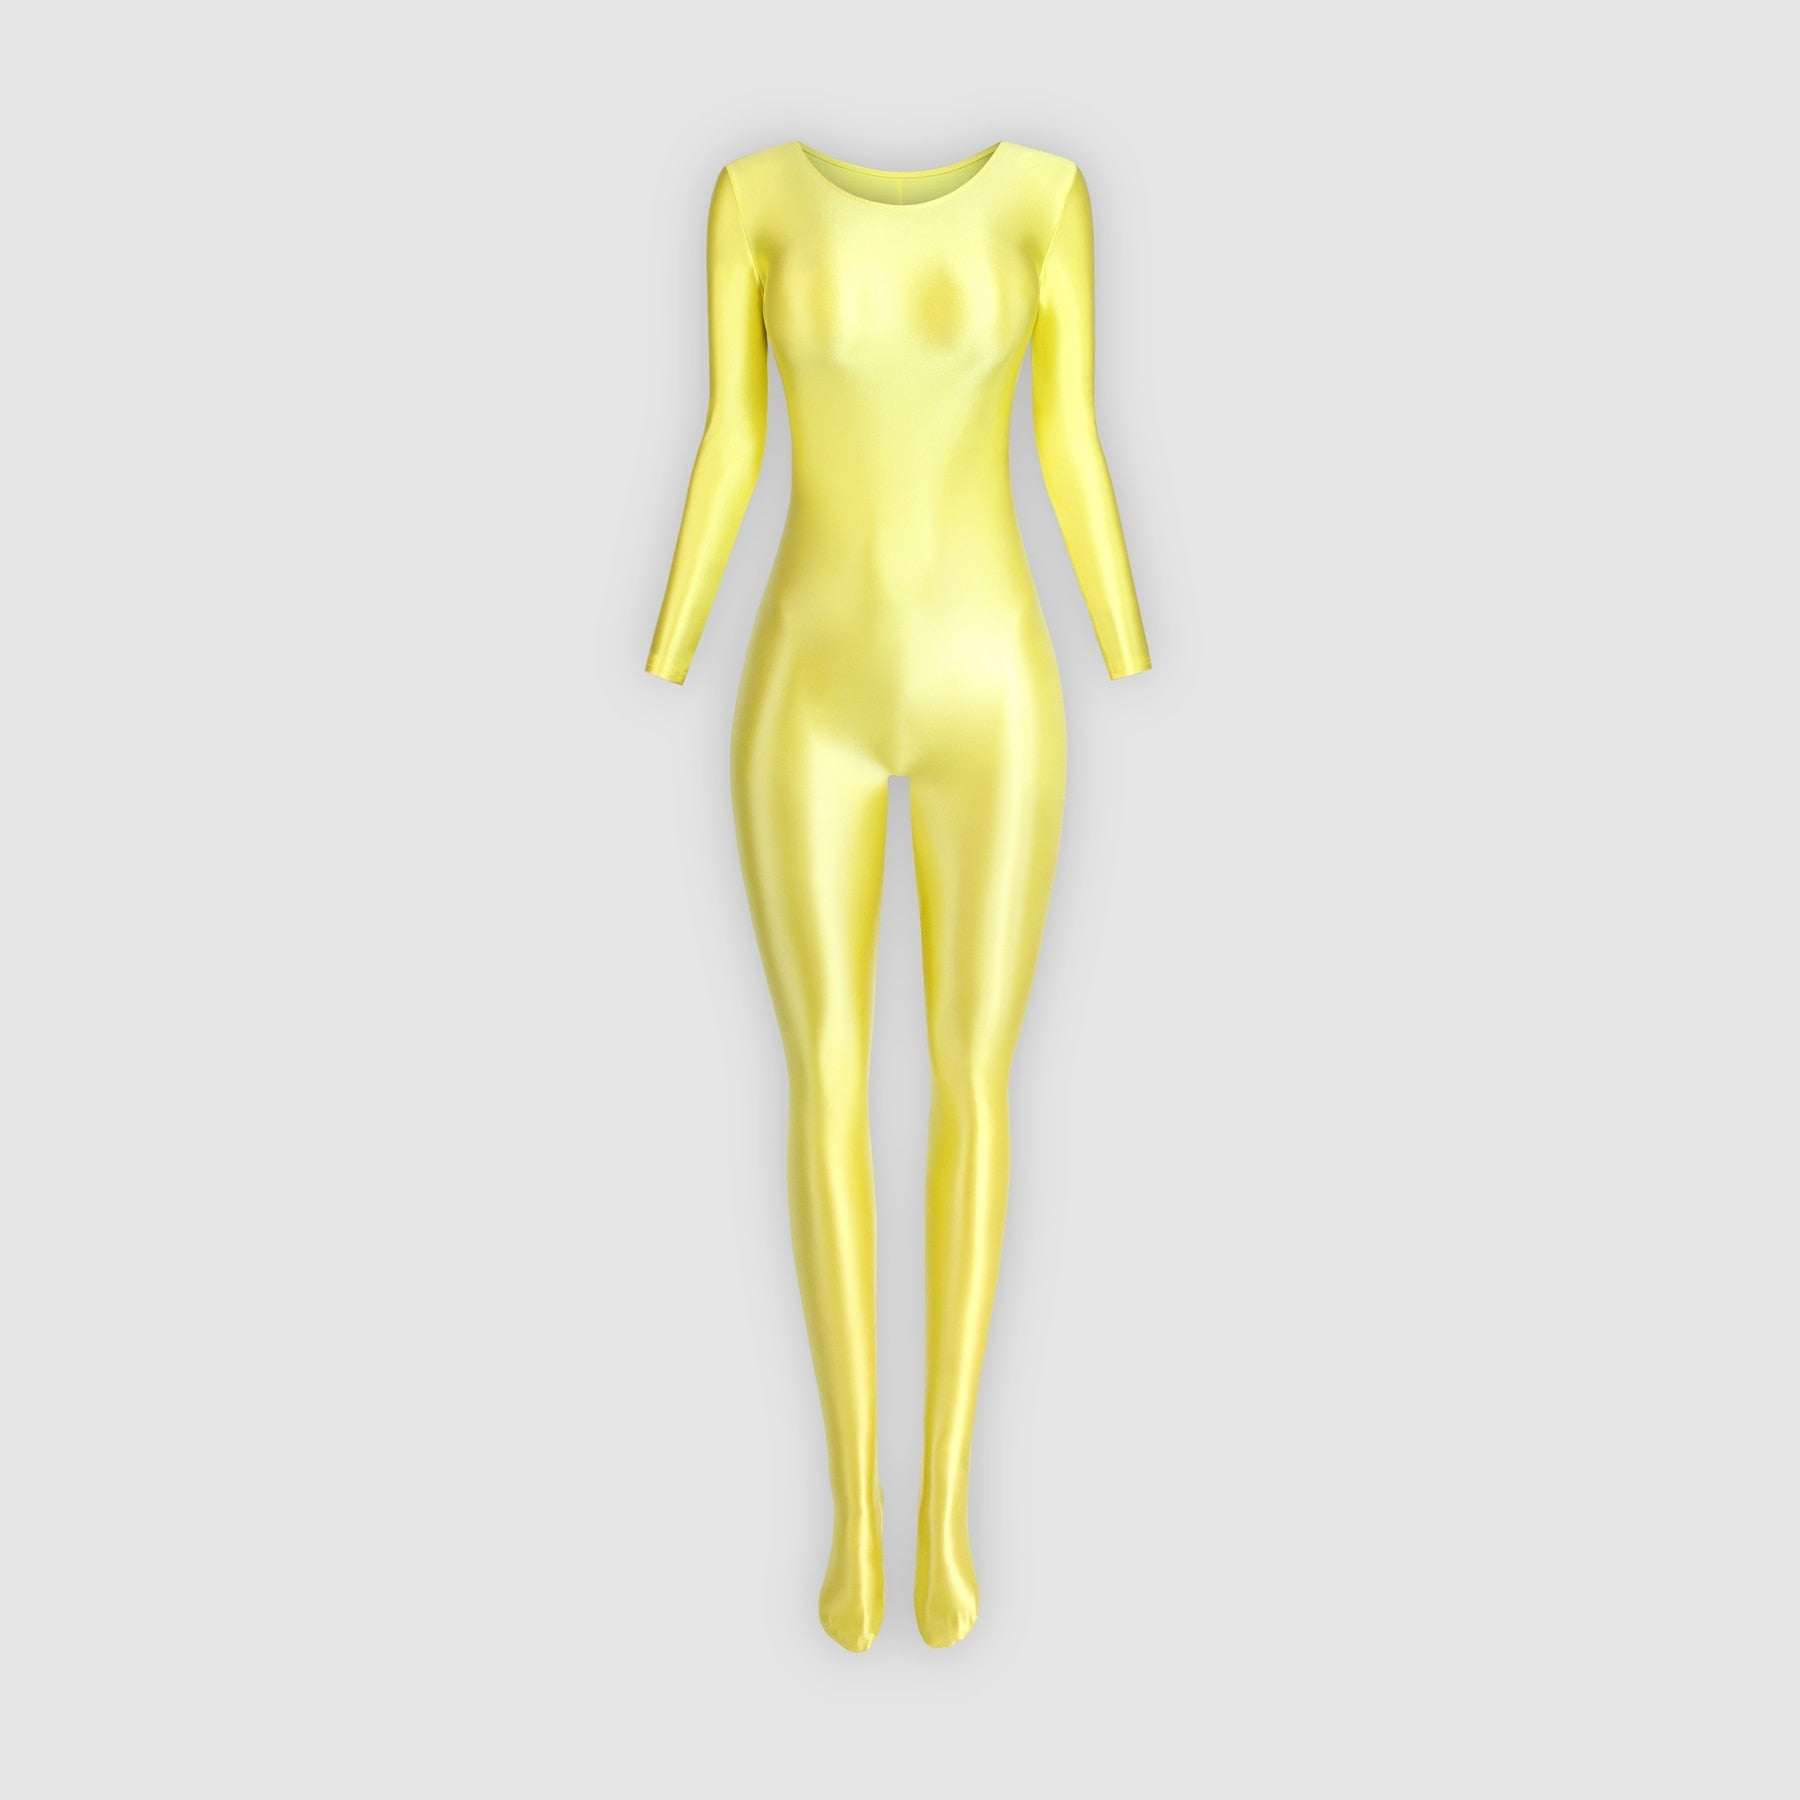 Front view of yellow wet look catsuit featuring a scoop neckline, long sleeves, and a stretchy glossy fabric that hugs your body like a second skin.